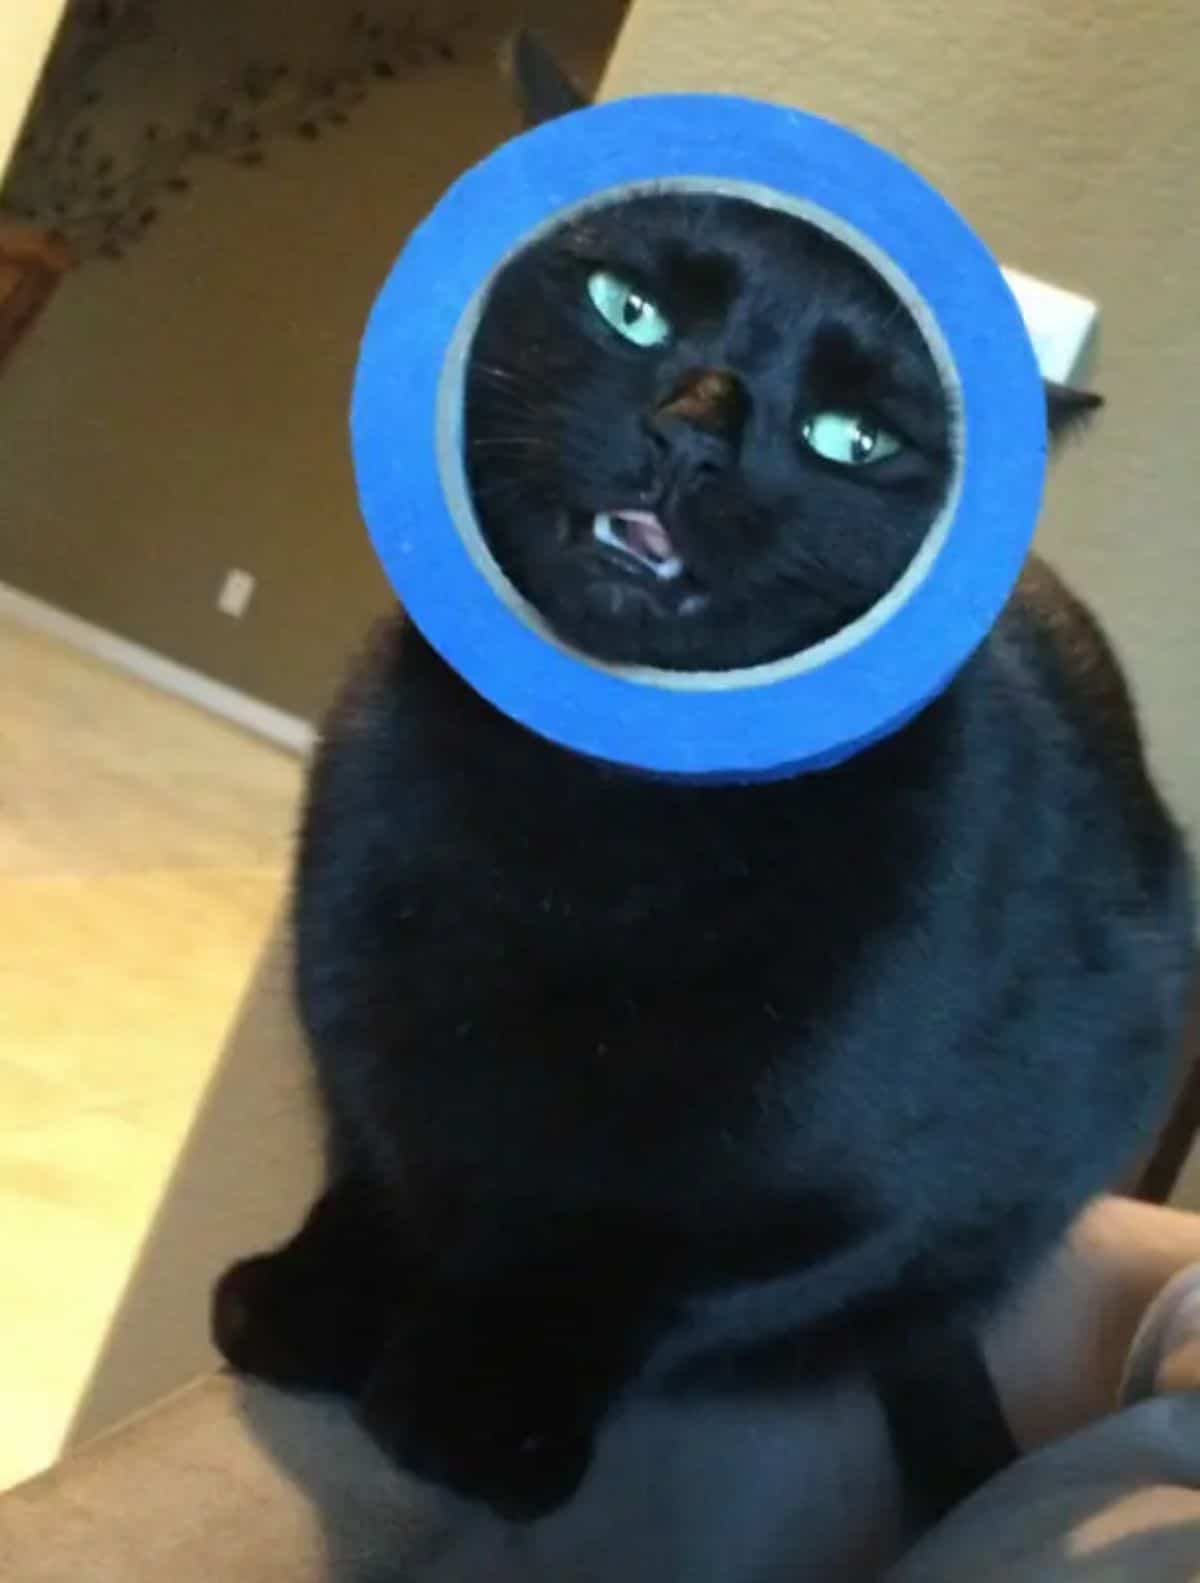 black cat sitting with the face stuck in a roll of blue tape